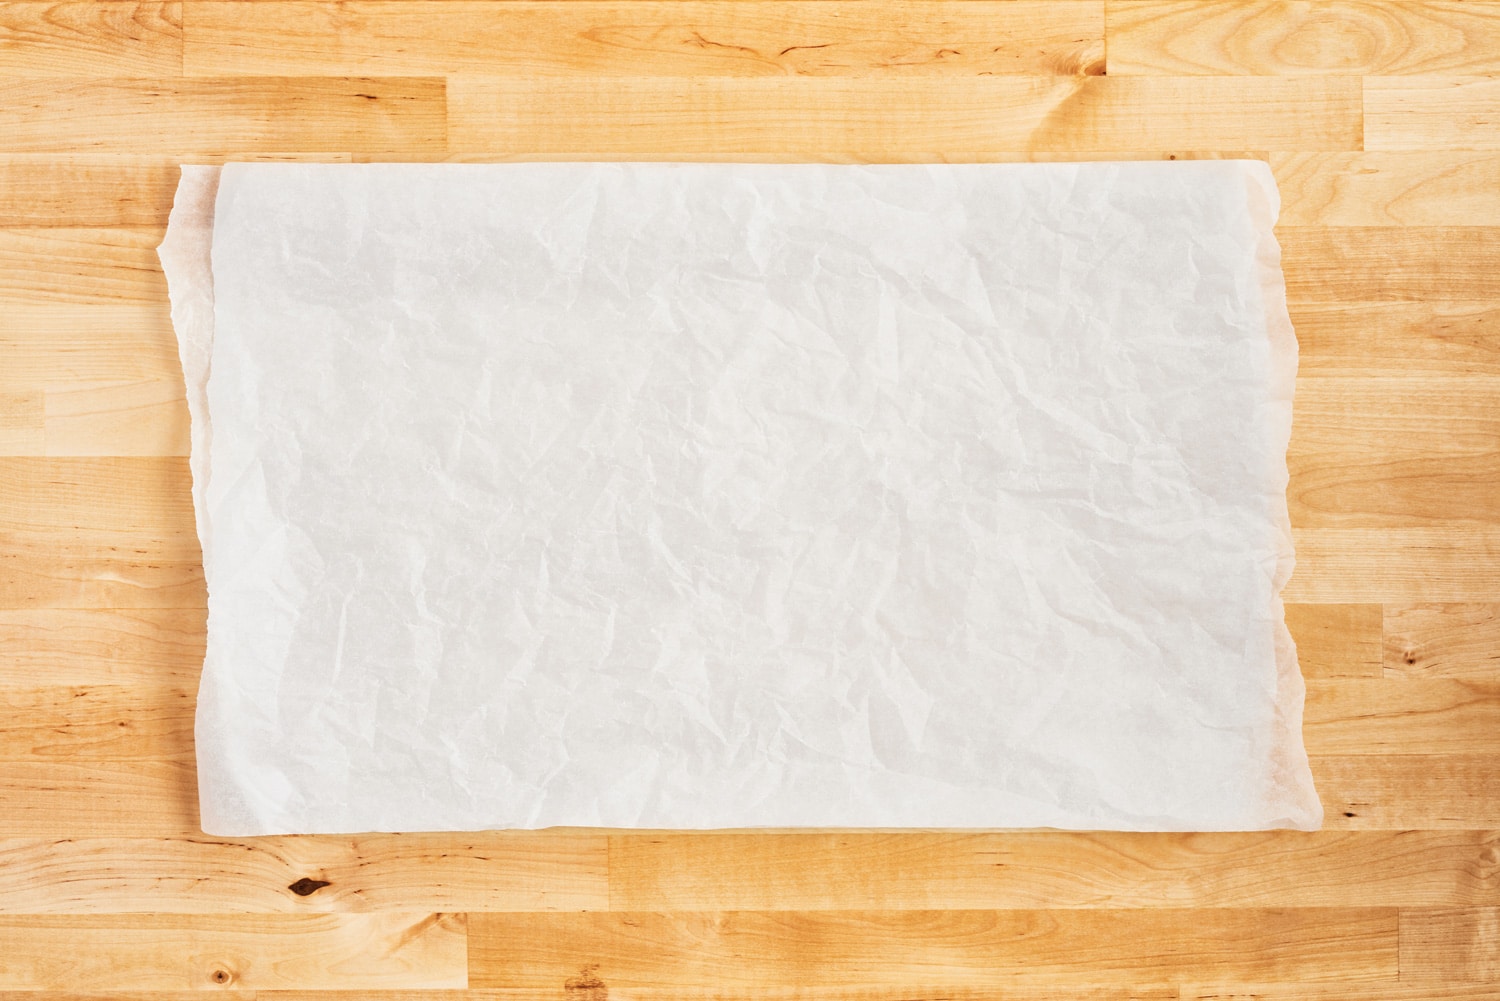 Crumpled piece of white parchment or baking paper on wooden table. Top view. Copy space for text and design element.